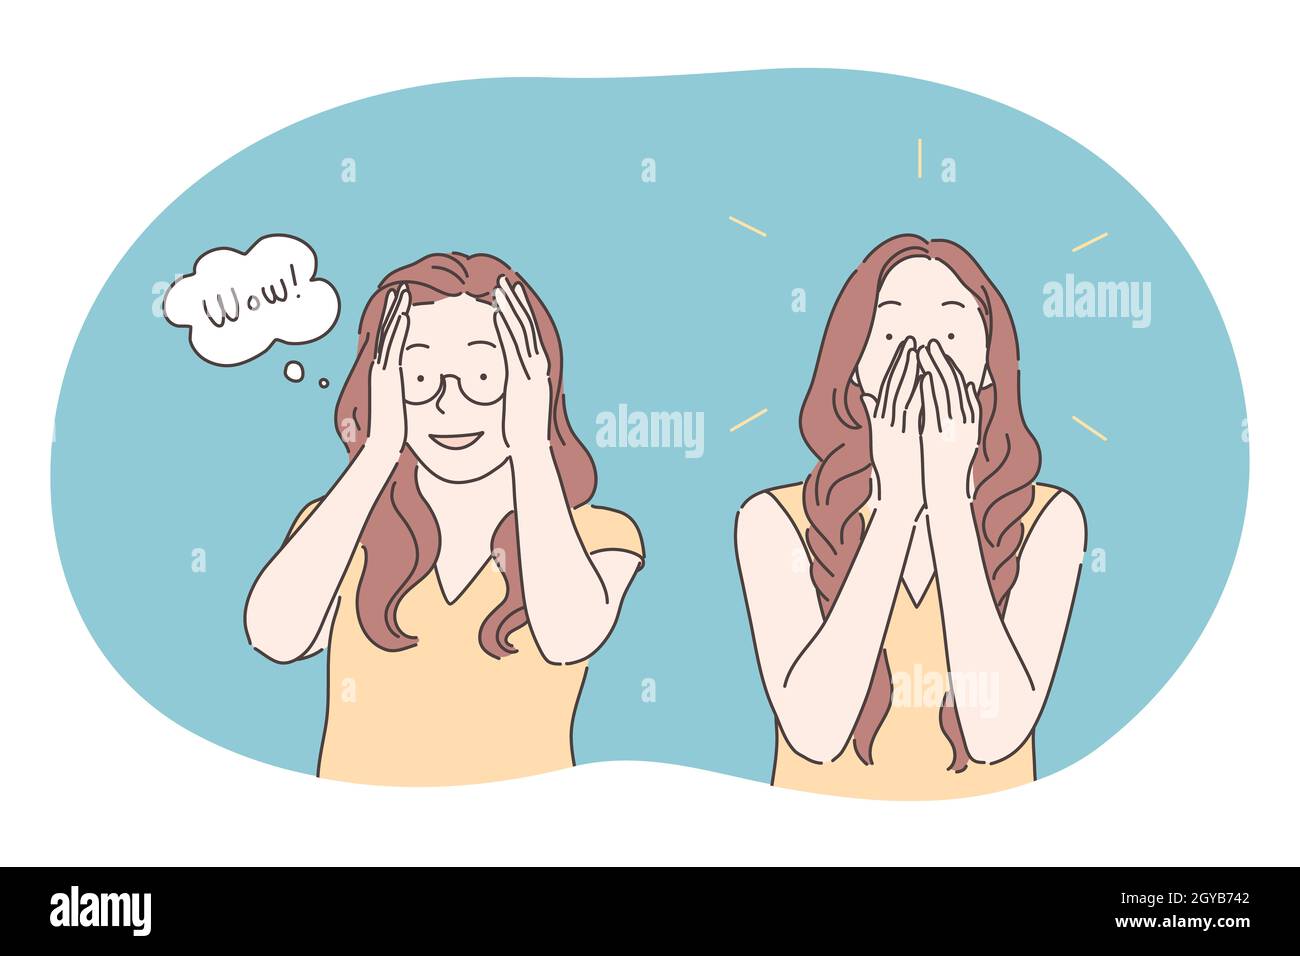 Surprise, positive shock, amazement, astonishment concept. Young girl cartoon character covering face and mouth with hands and expressing surprise and Stock Photo